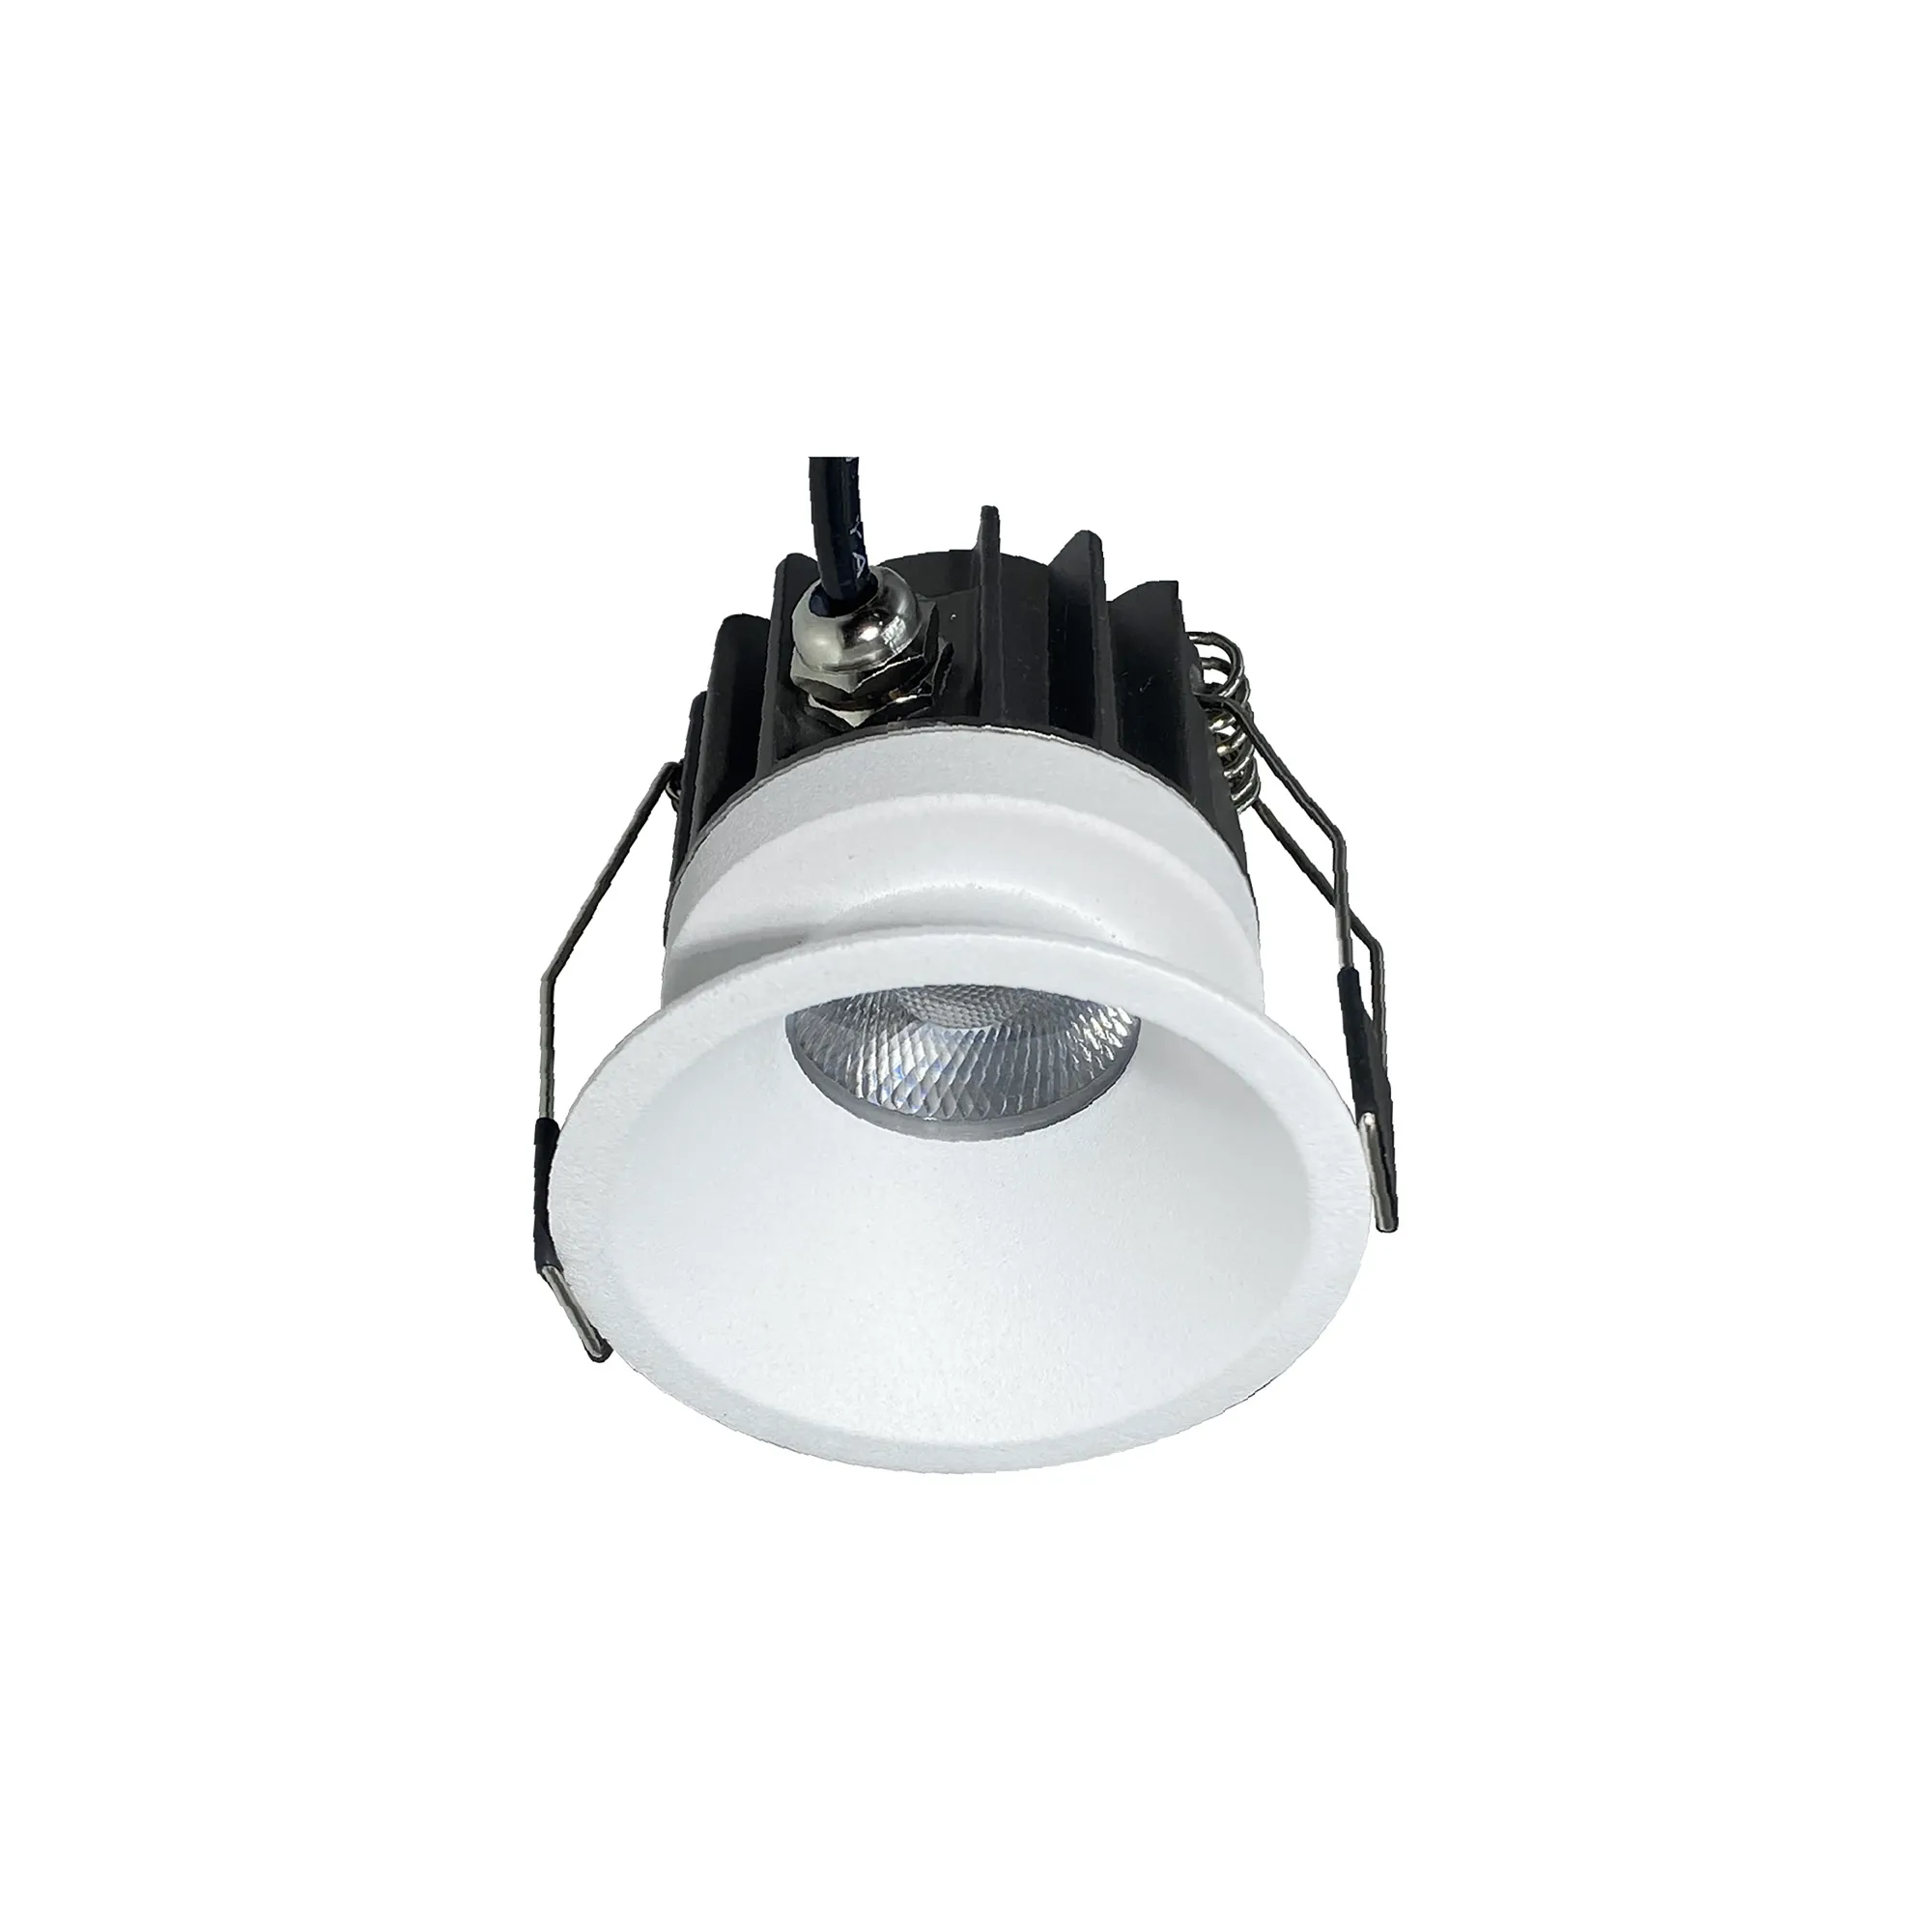 M8764  Rombok Downlight 8W LED; Dimmable CCT LED; Cut Out: 55mm; 720lm; 36° Deg; IP65 DRIVER INC.; White